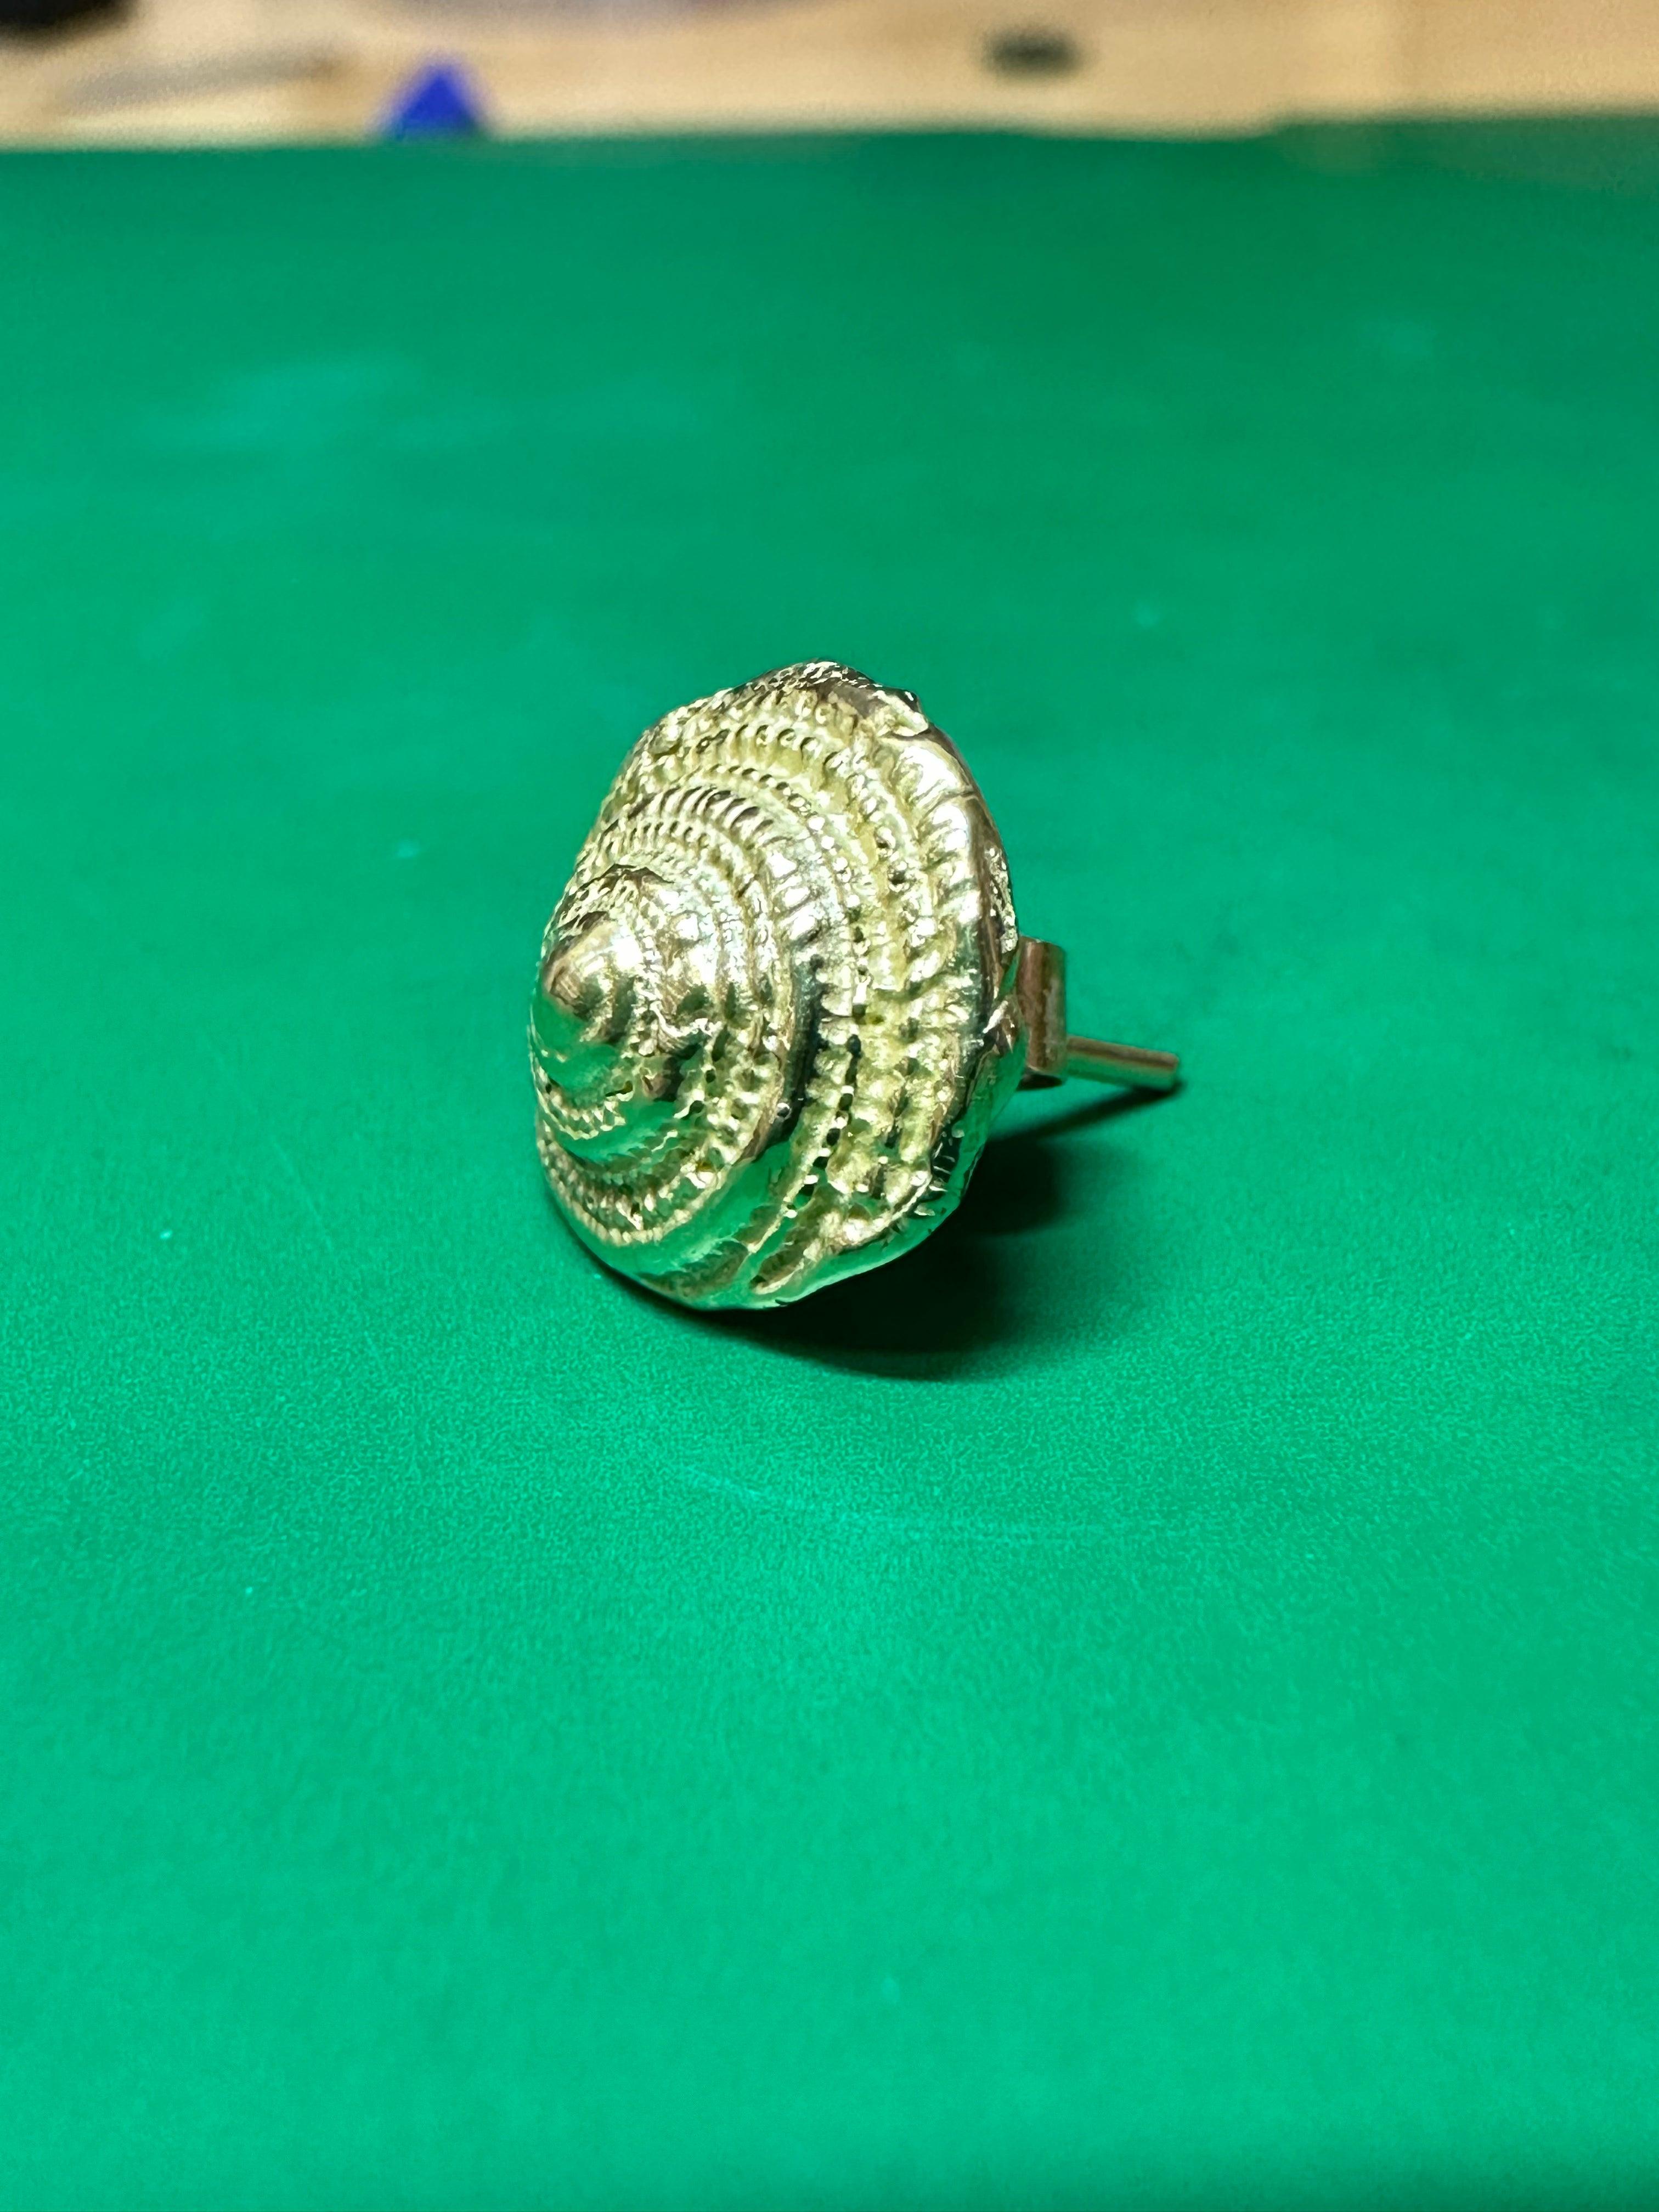 A stunning 18ct Yellow Gold Stud which is a copy of a real sea snail chic and elegant design but also lightweight it will offer a touch of sophistication and summer while it is comfortable for everyday wear. 

This versatile stud can be beautifully